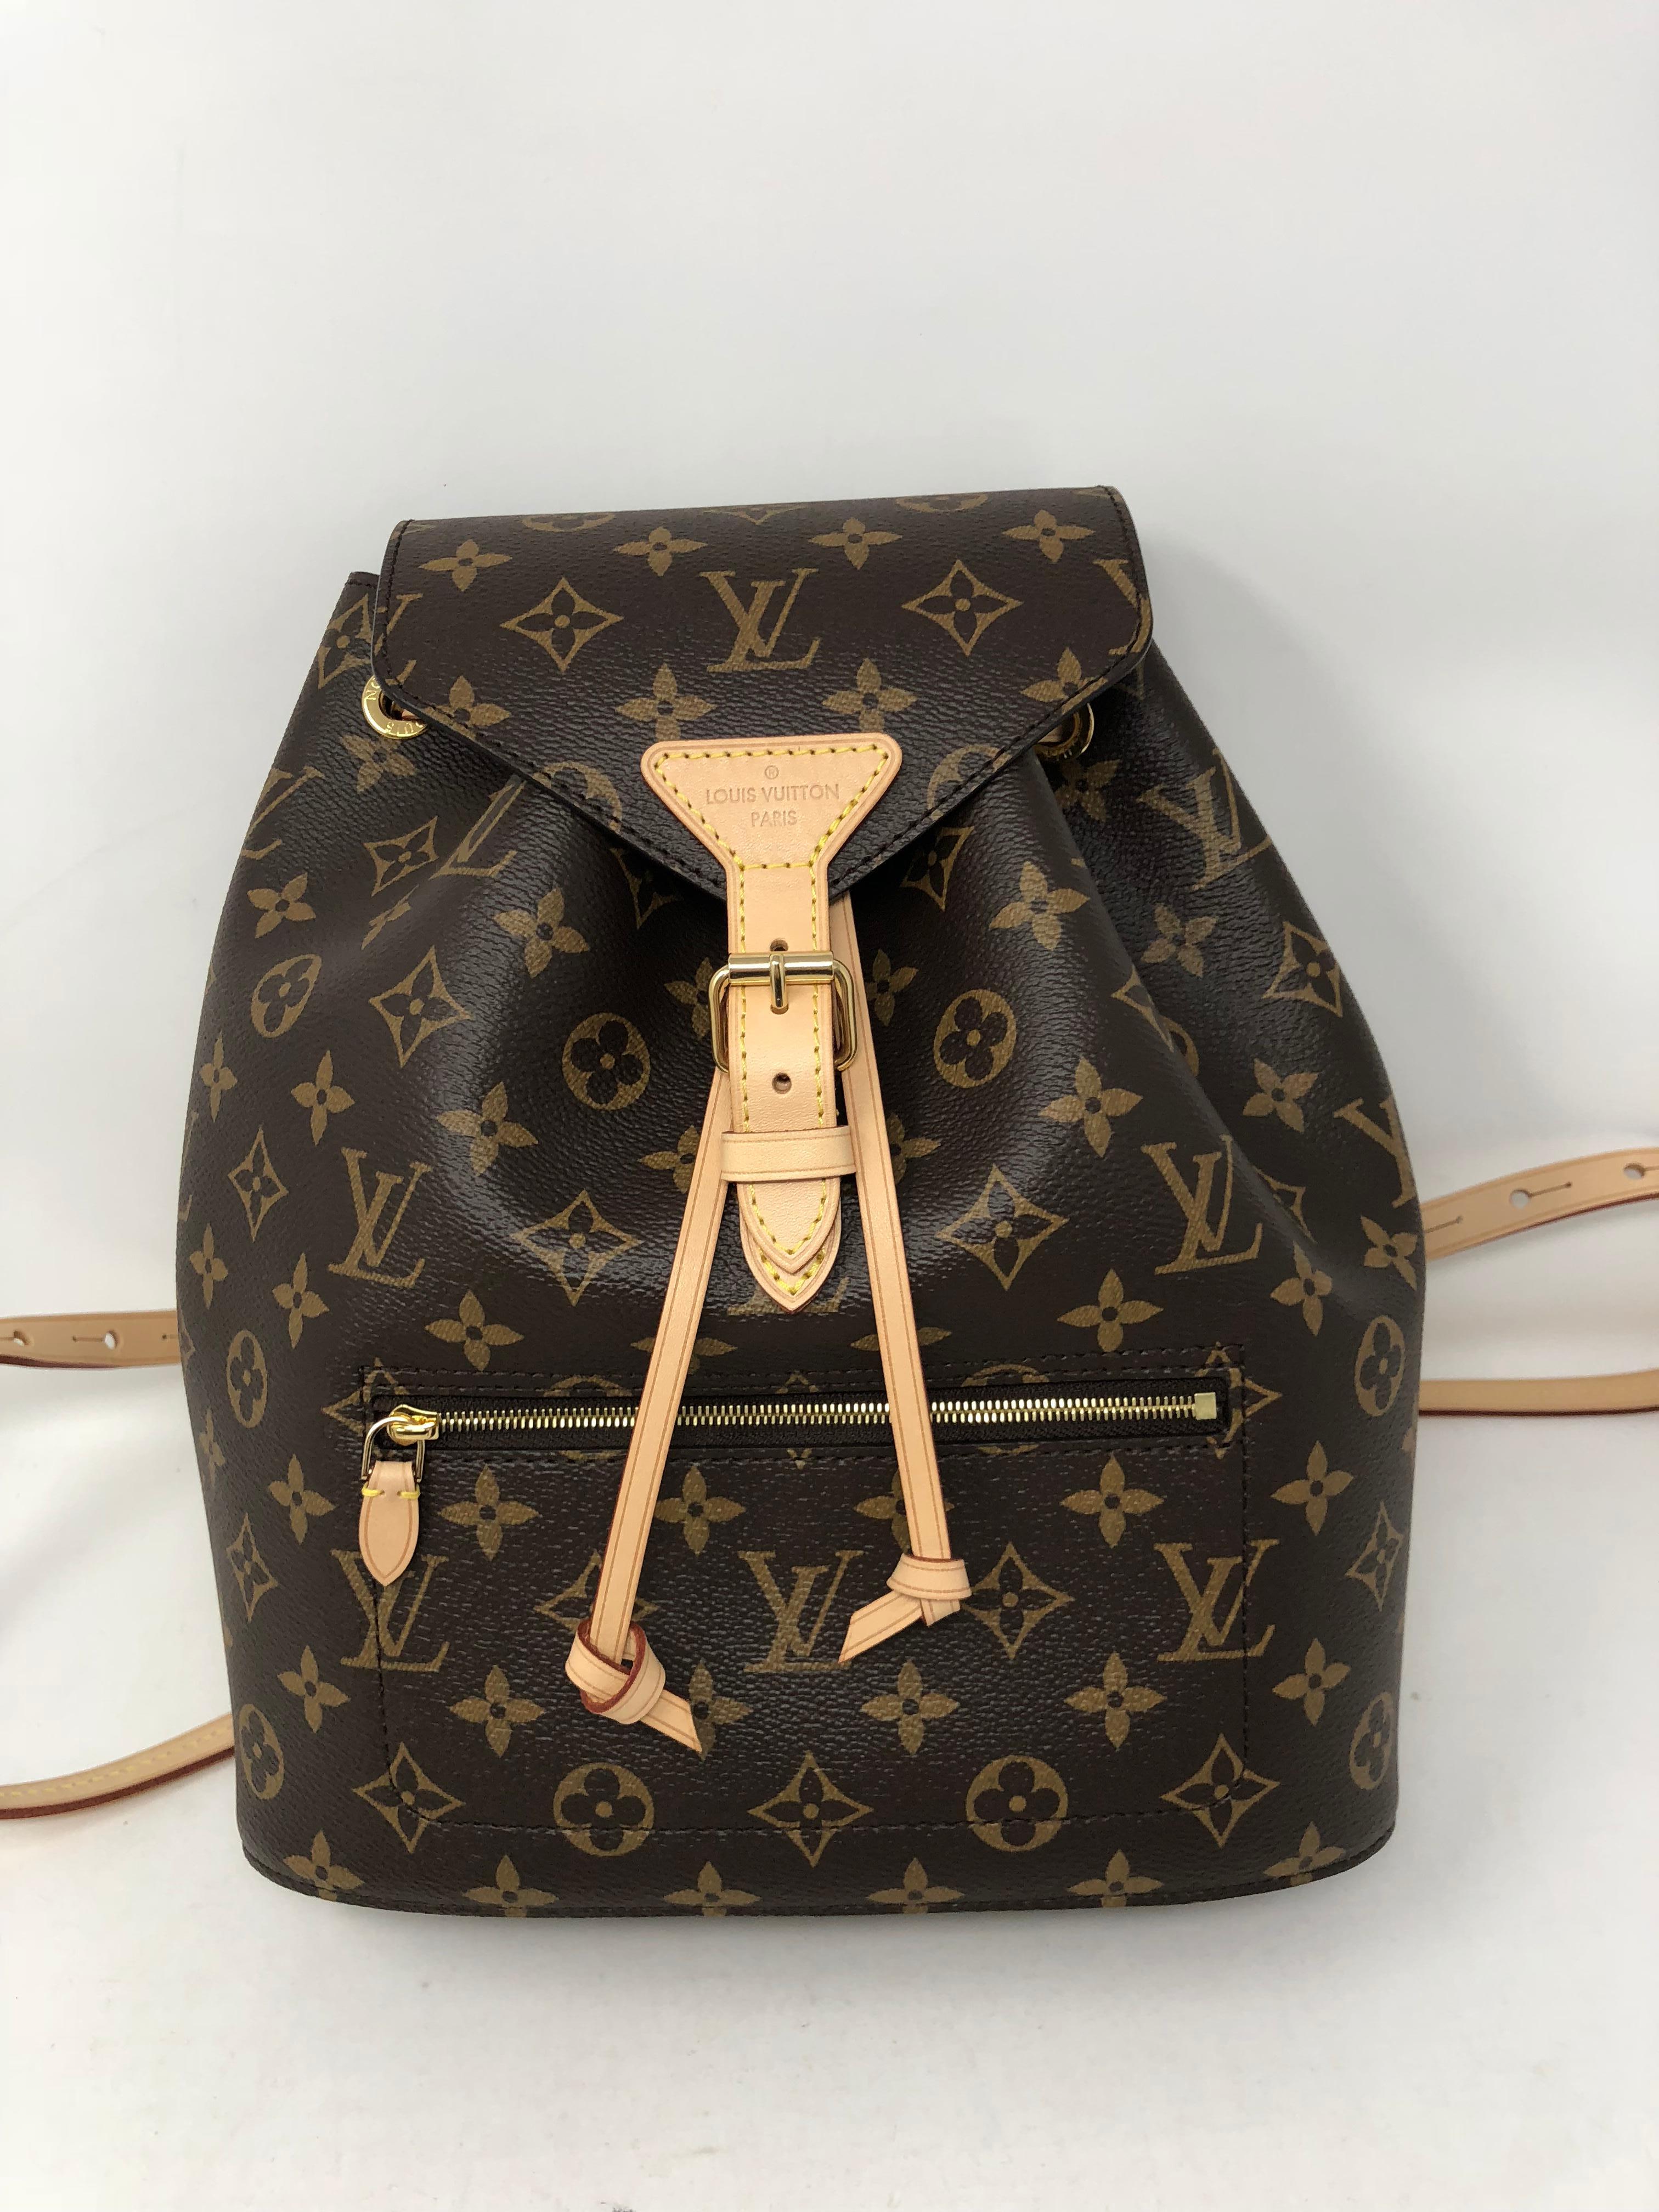 Louis Vuitton Monogram Montsouri Backpack. Newest version by LV. Brand new and hard to get. Never worn backpack comes with full set. Dust cover and box included. Guaranteed authentic. 